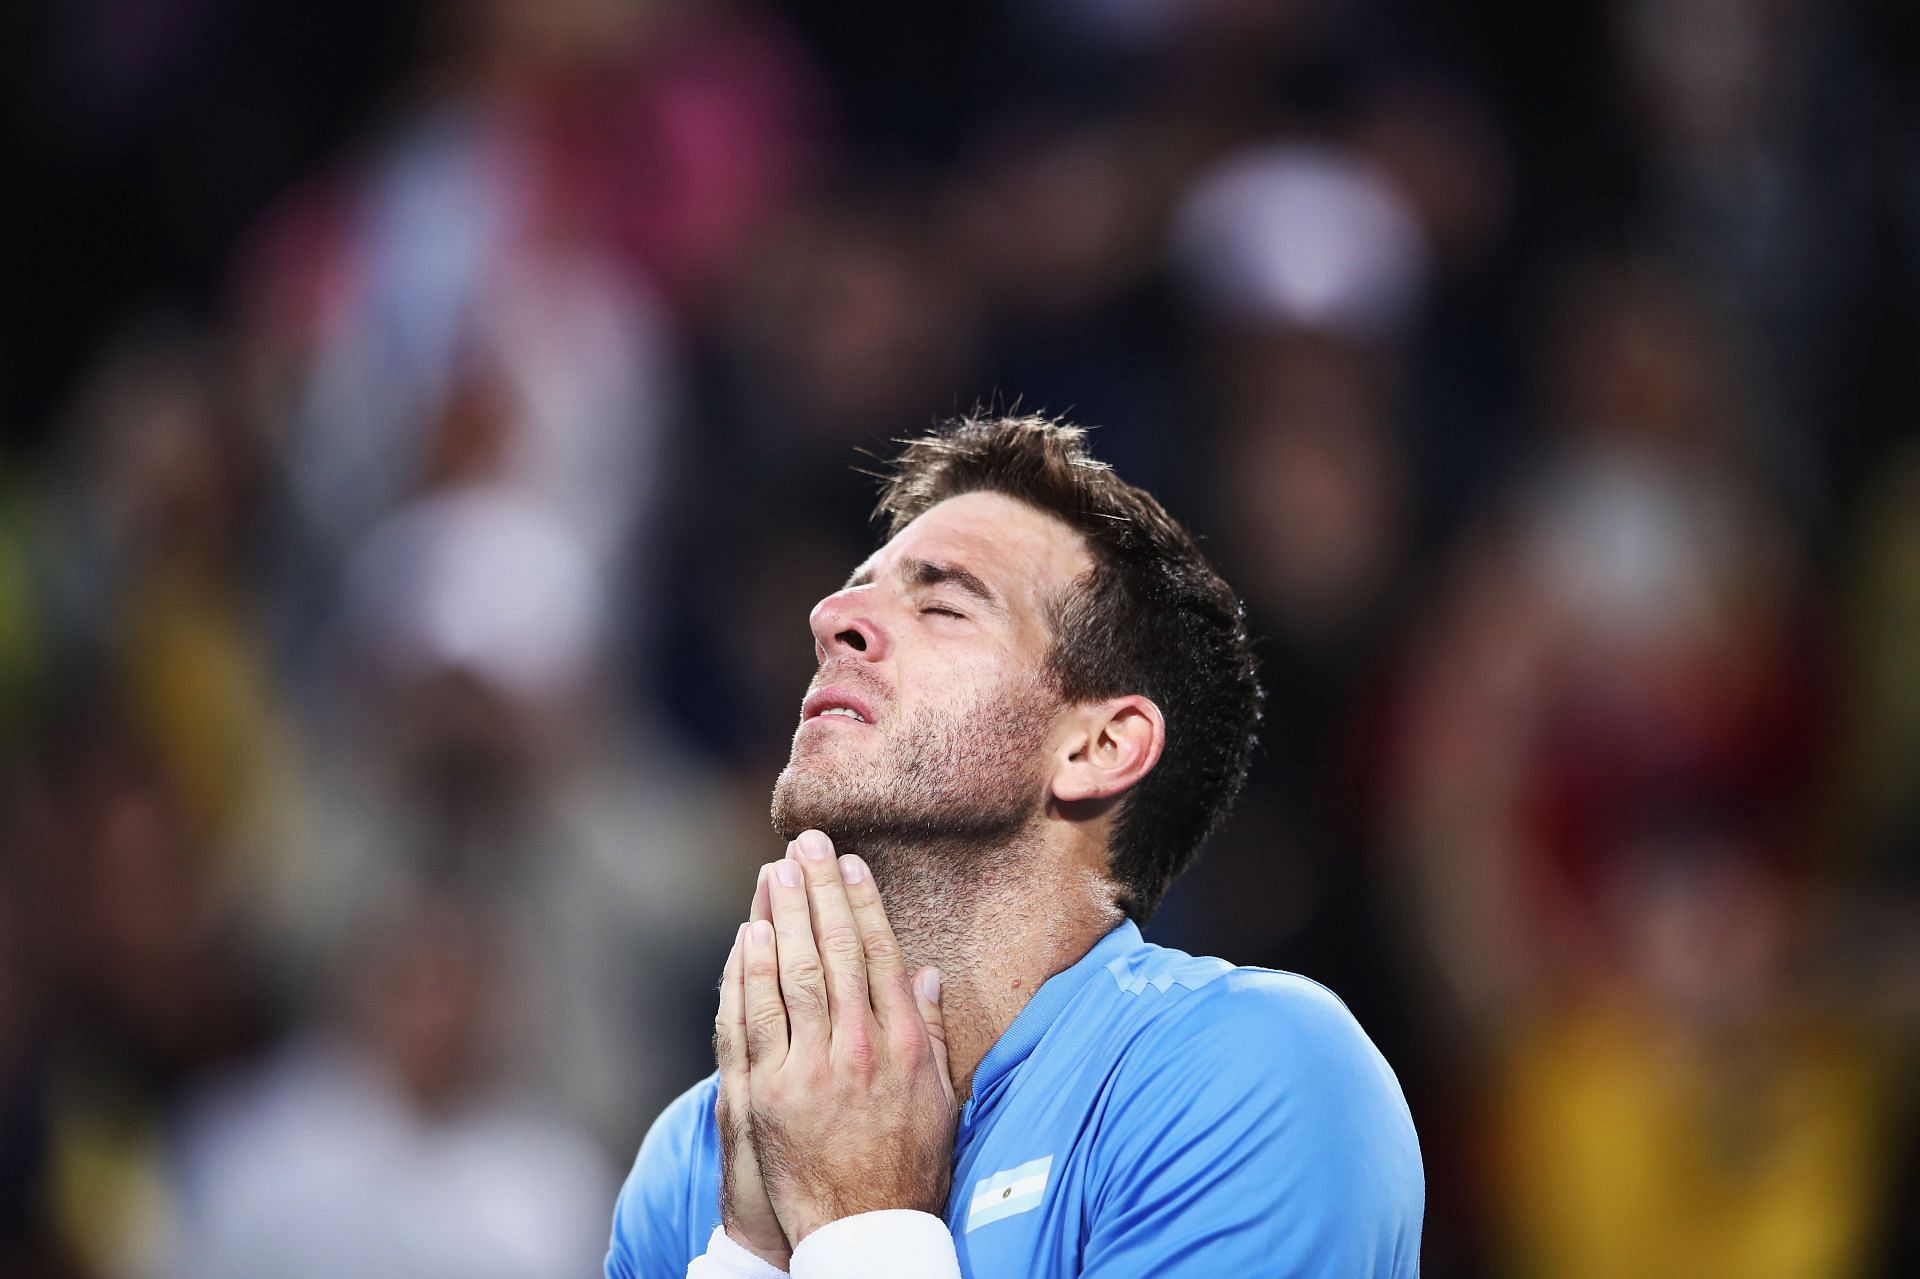 Juan Martin del Potro has not played a tennis match in nearly three years